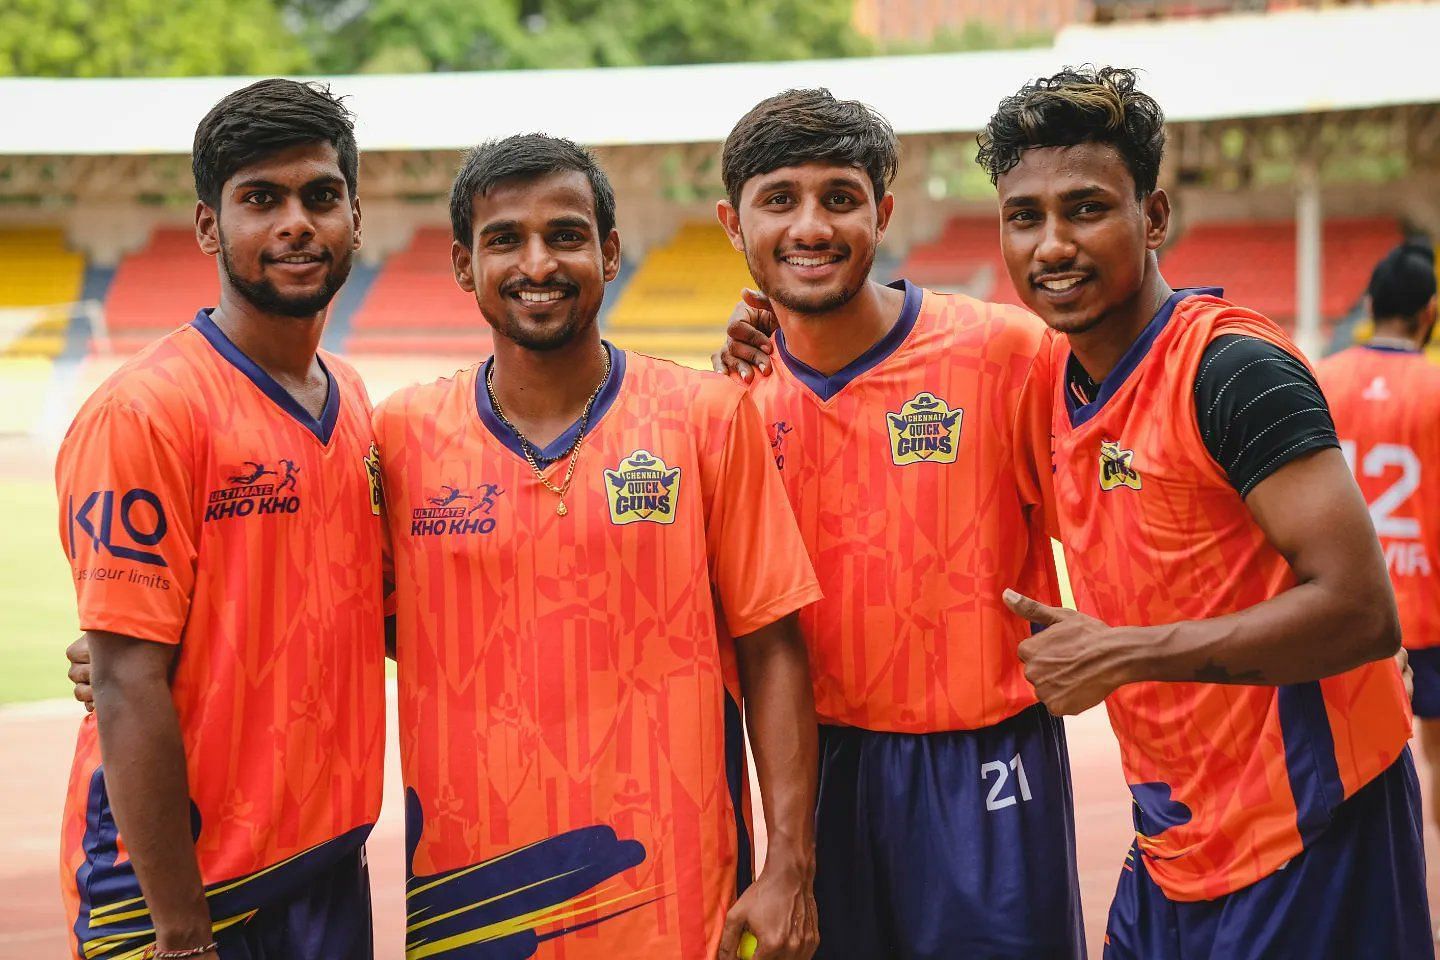 Sachin Gaur (second from right) plays the role of an attacker.